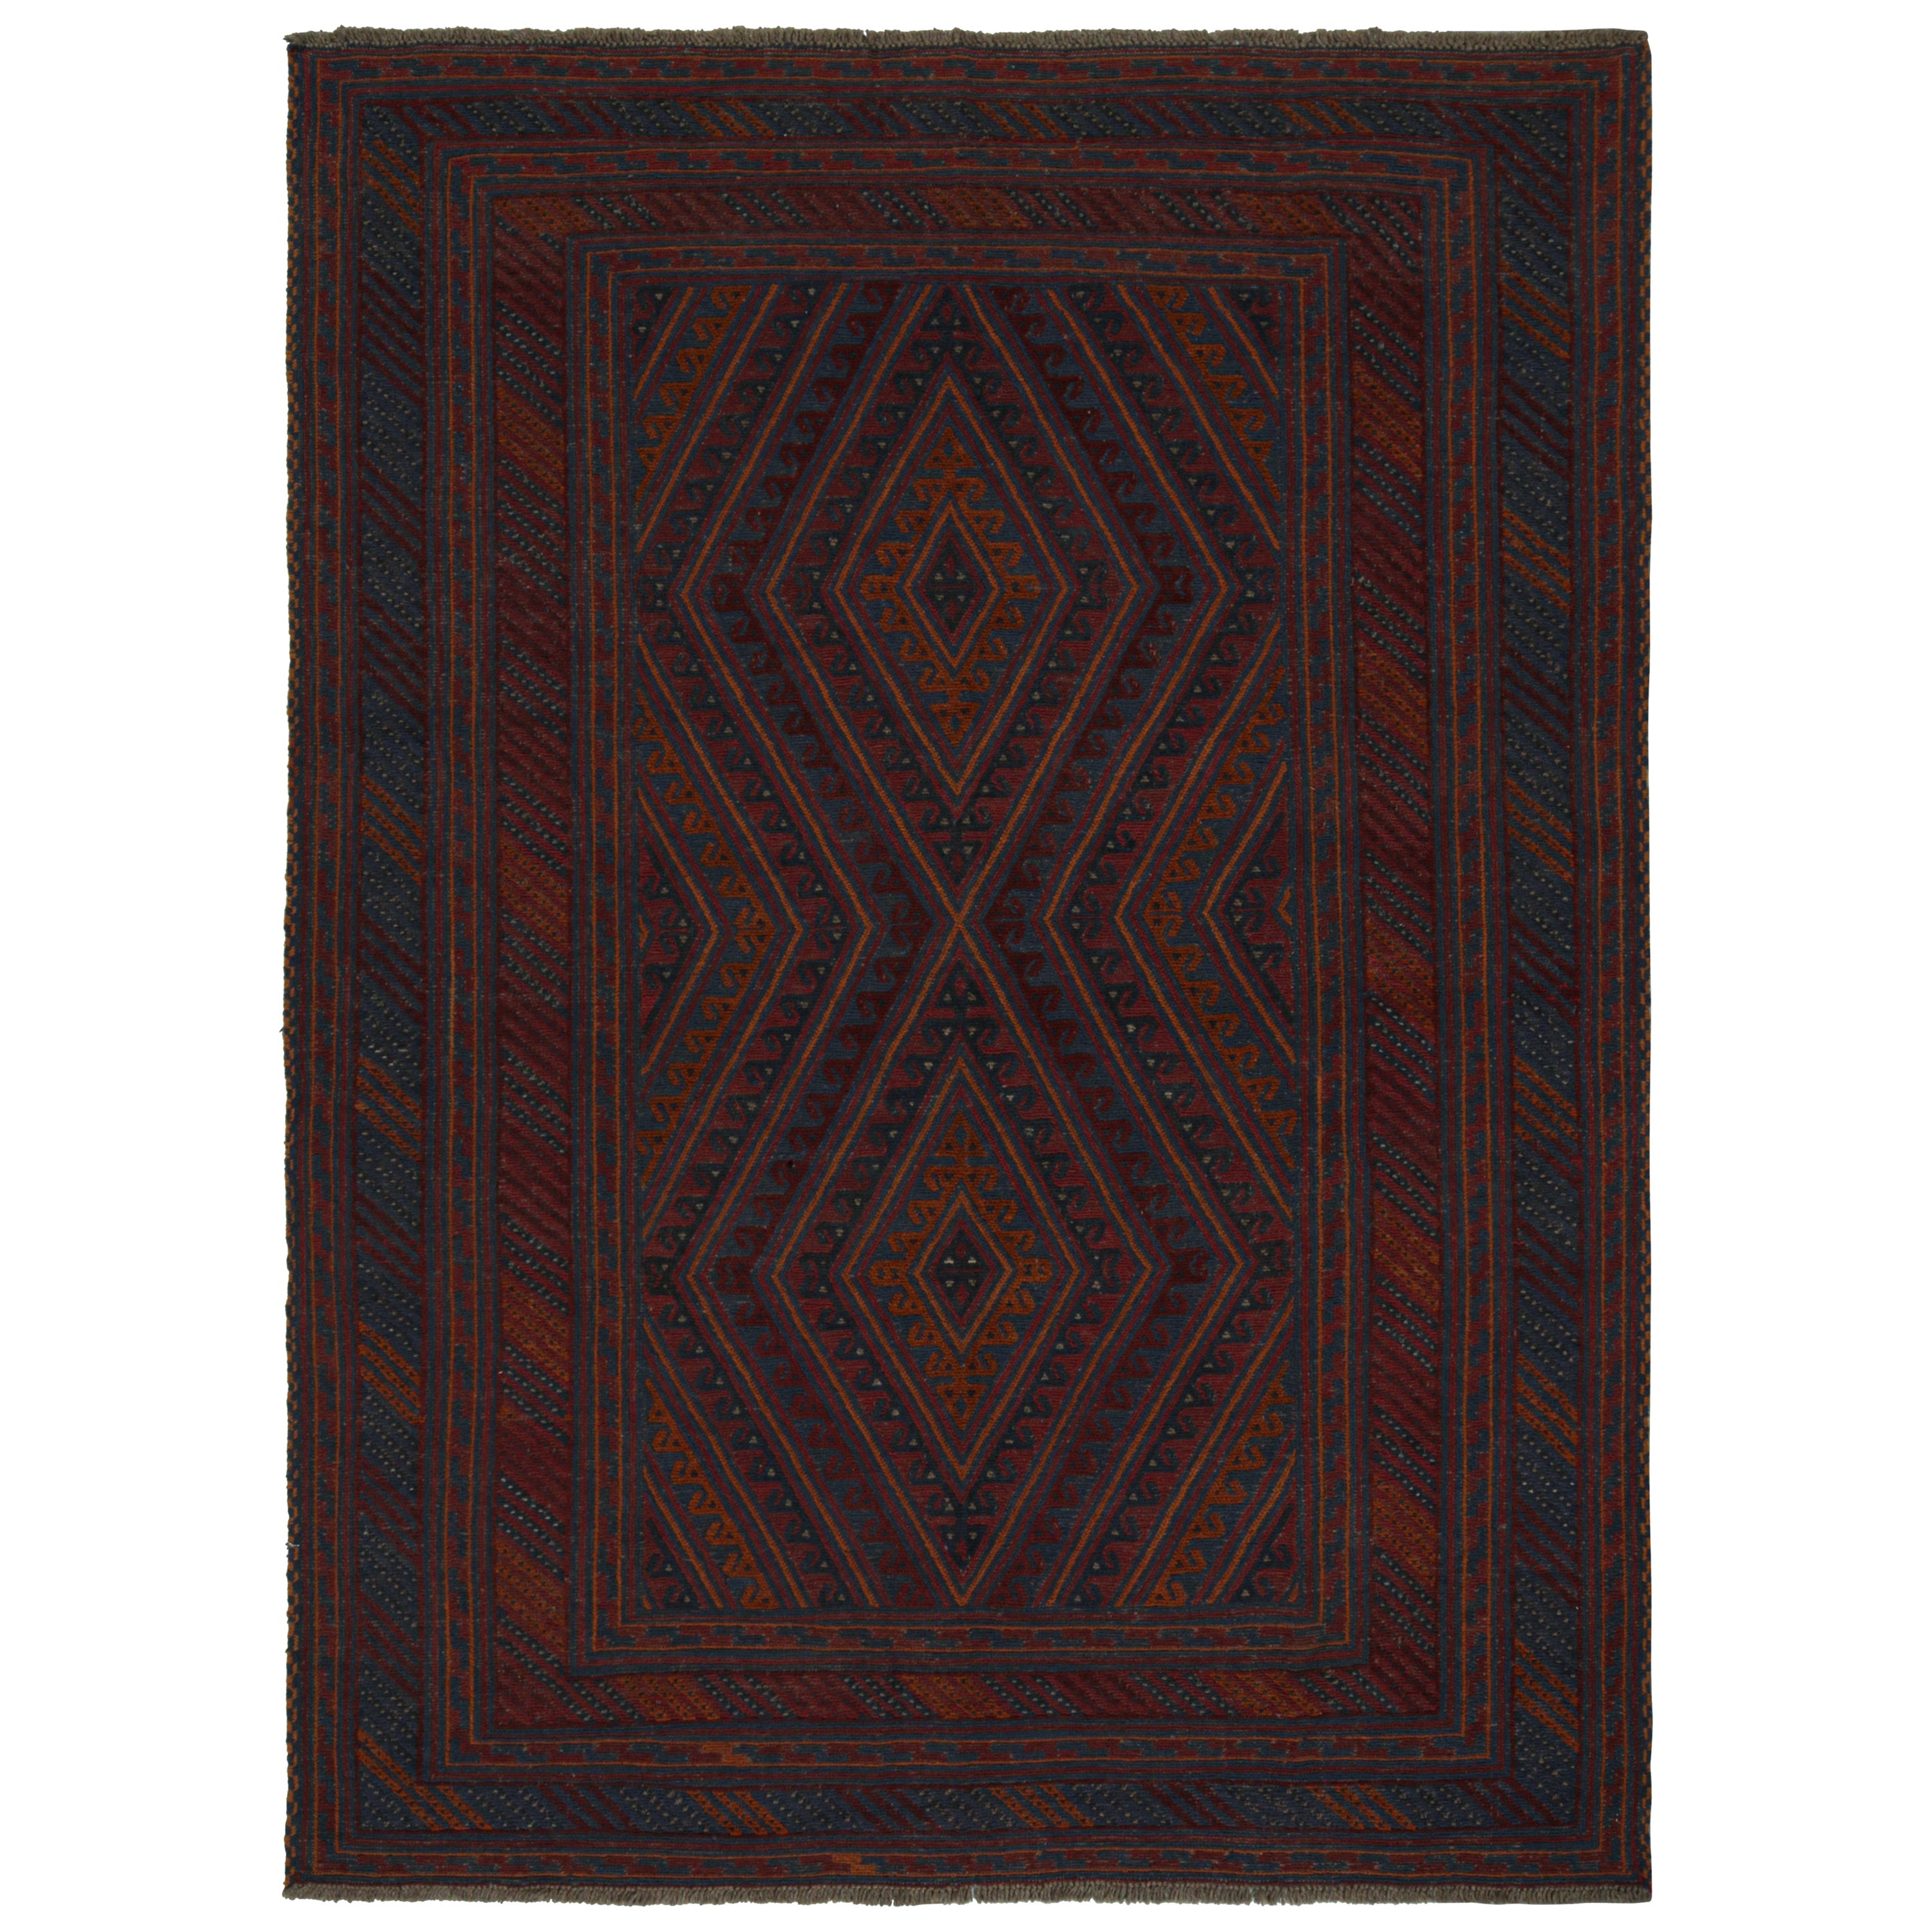 Vintage Tribal Rug with Red, Orange & Blue Geometric Pattern, from Rug & Kilim For Sale